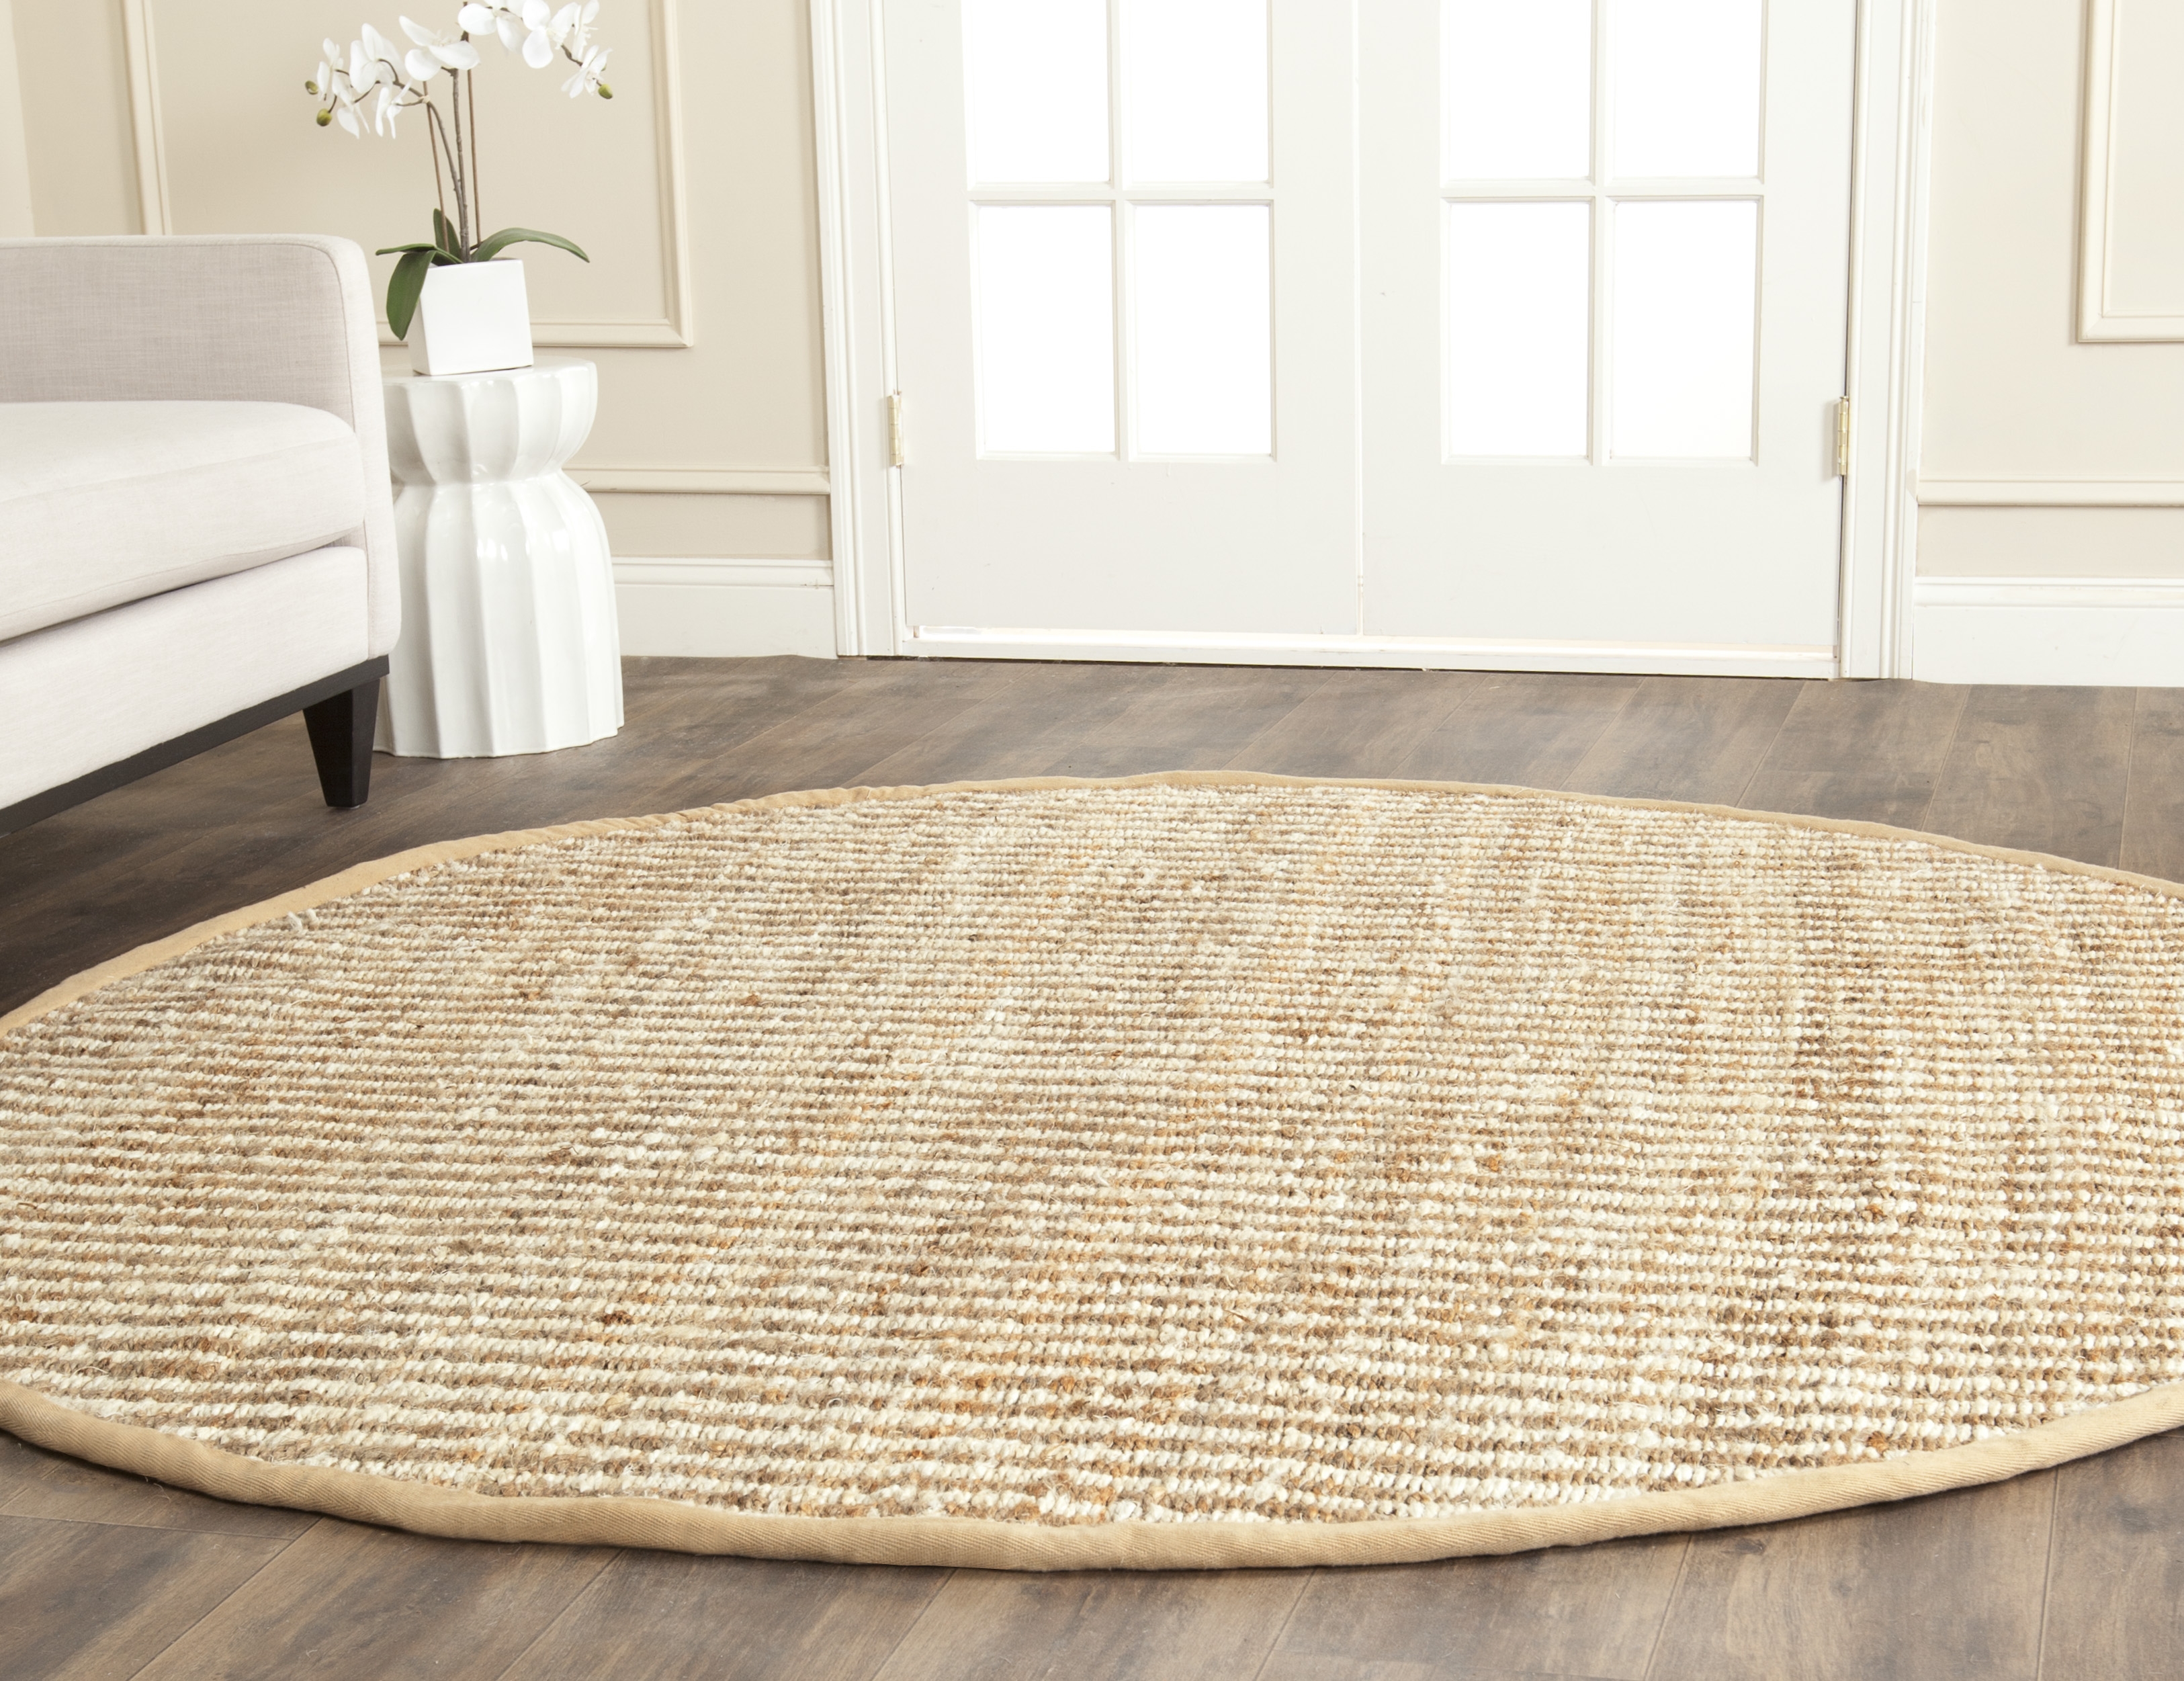 Arlo Home Hand Woven Area Rug, NF734A, Natural/Ivory,  7' X 7' Round - Image 1